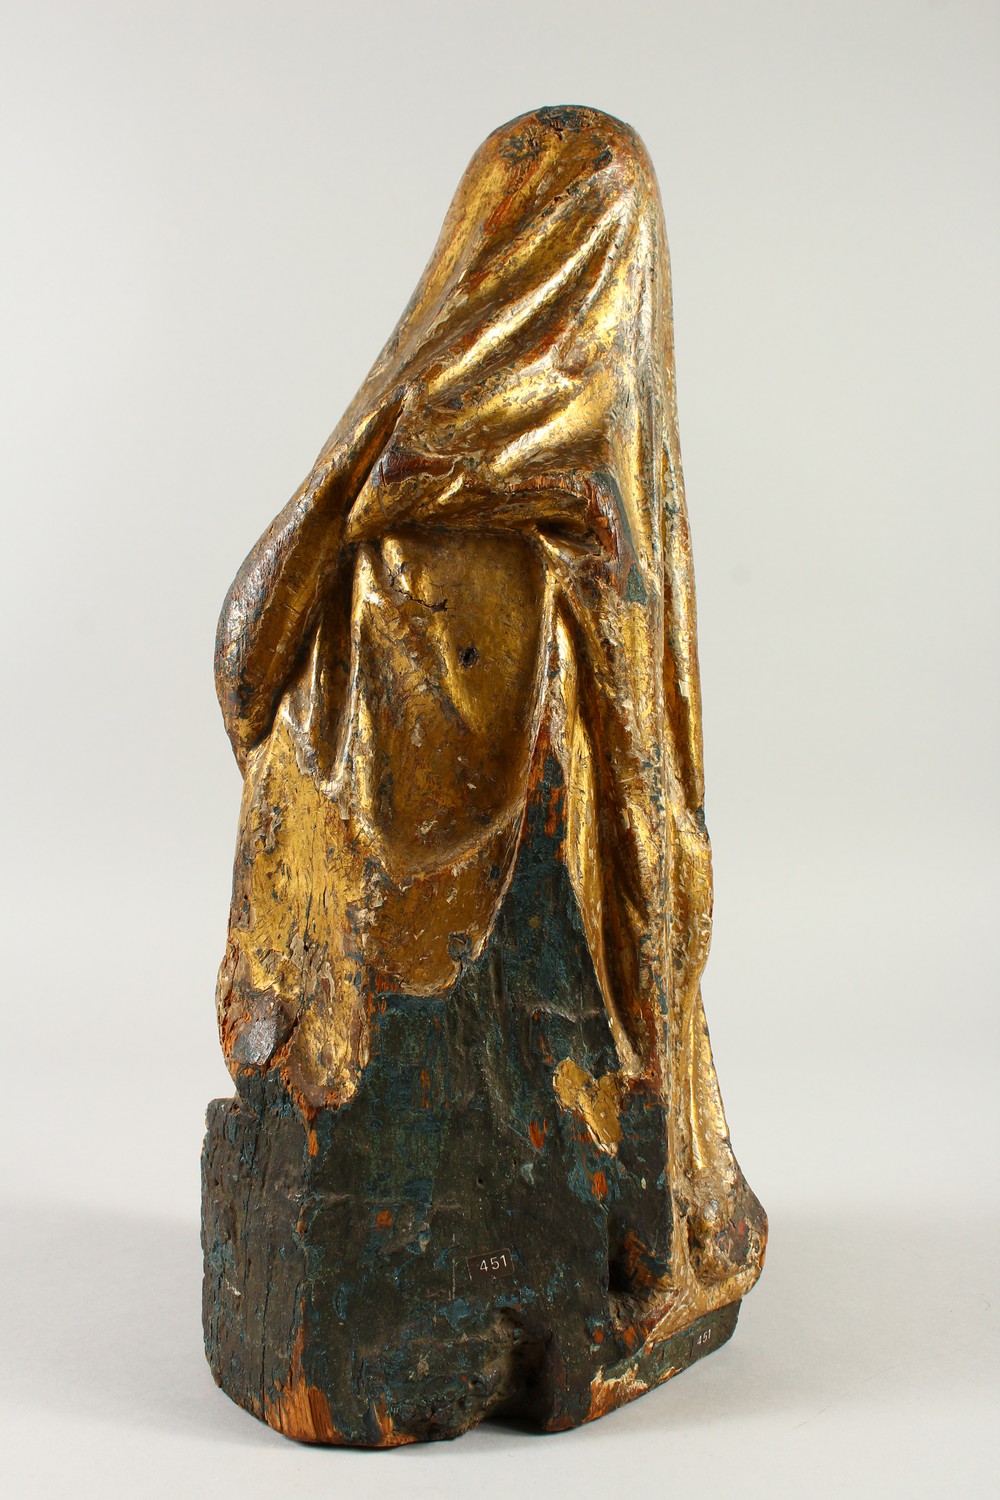 A 17TH - 18TH CENTURY ITALIAN CARVED, GILDED AND PAINTED MADONNA. 46cm high. - Image 4 of 6